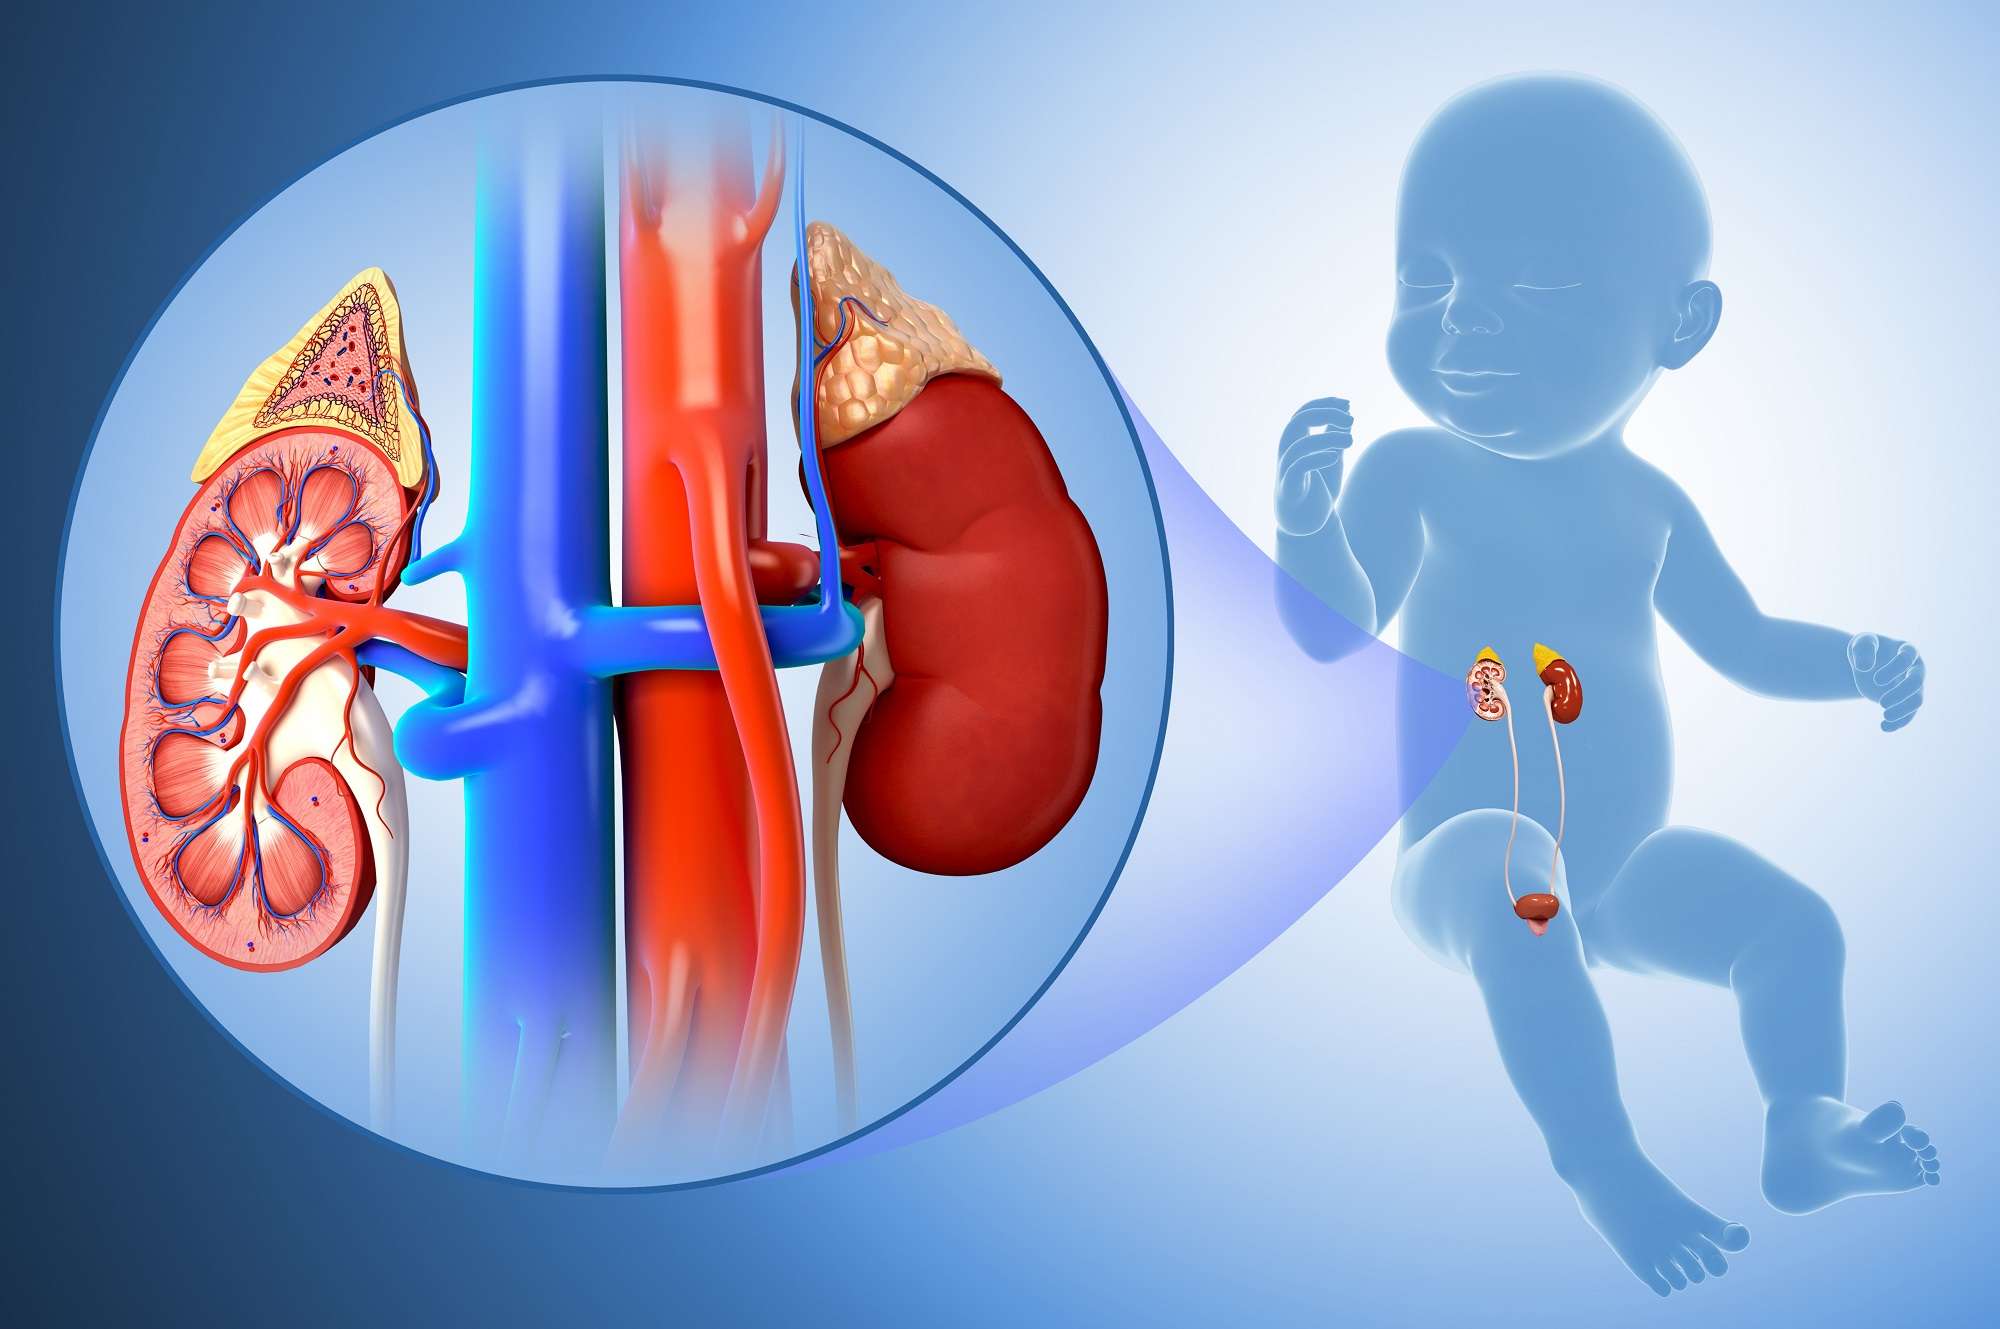 Enlarged Kidneys Noted in Neonates With Congenital Heart Disease